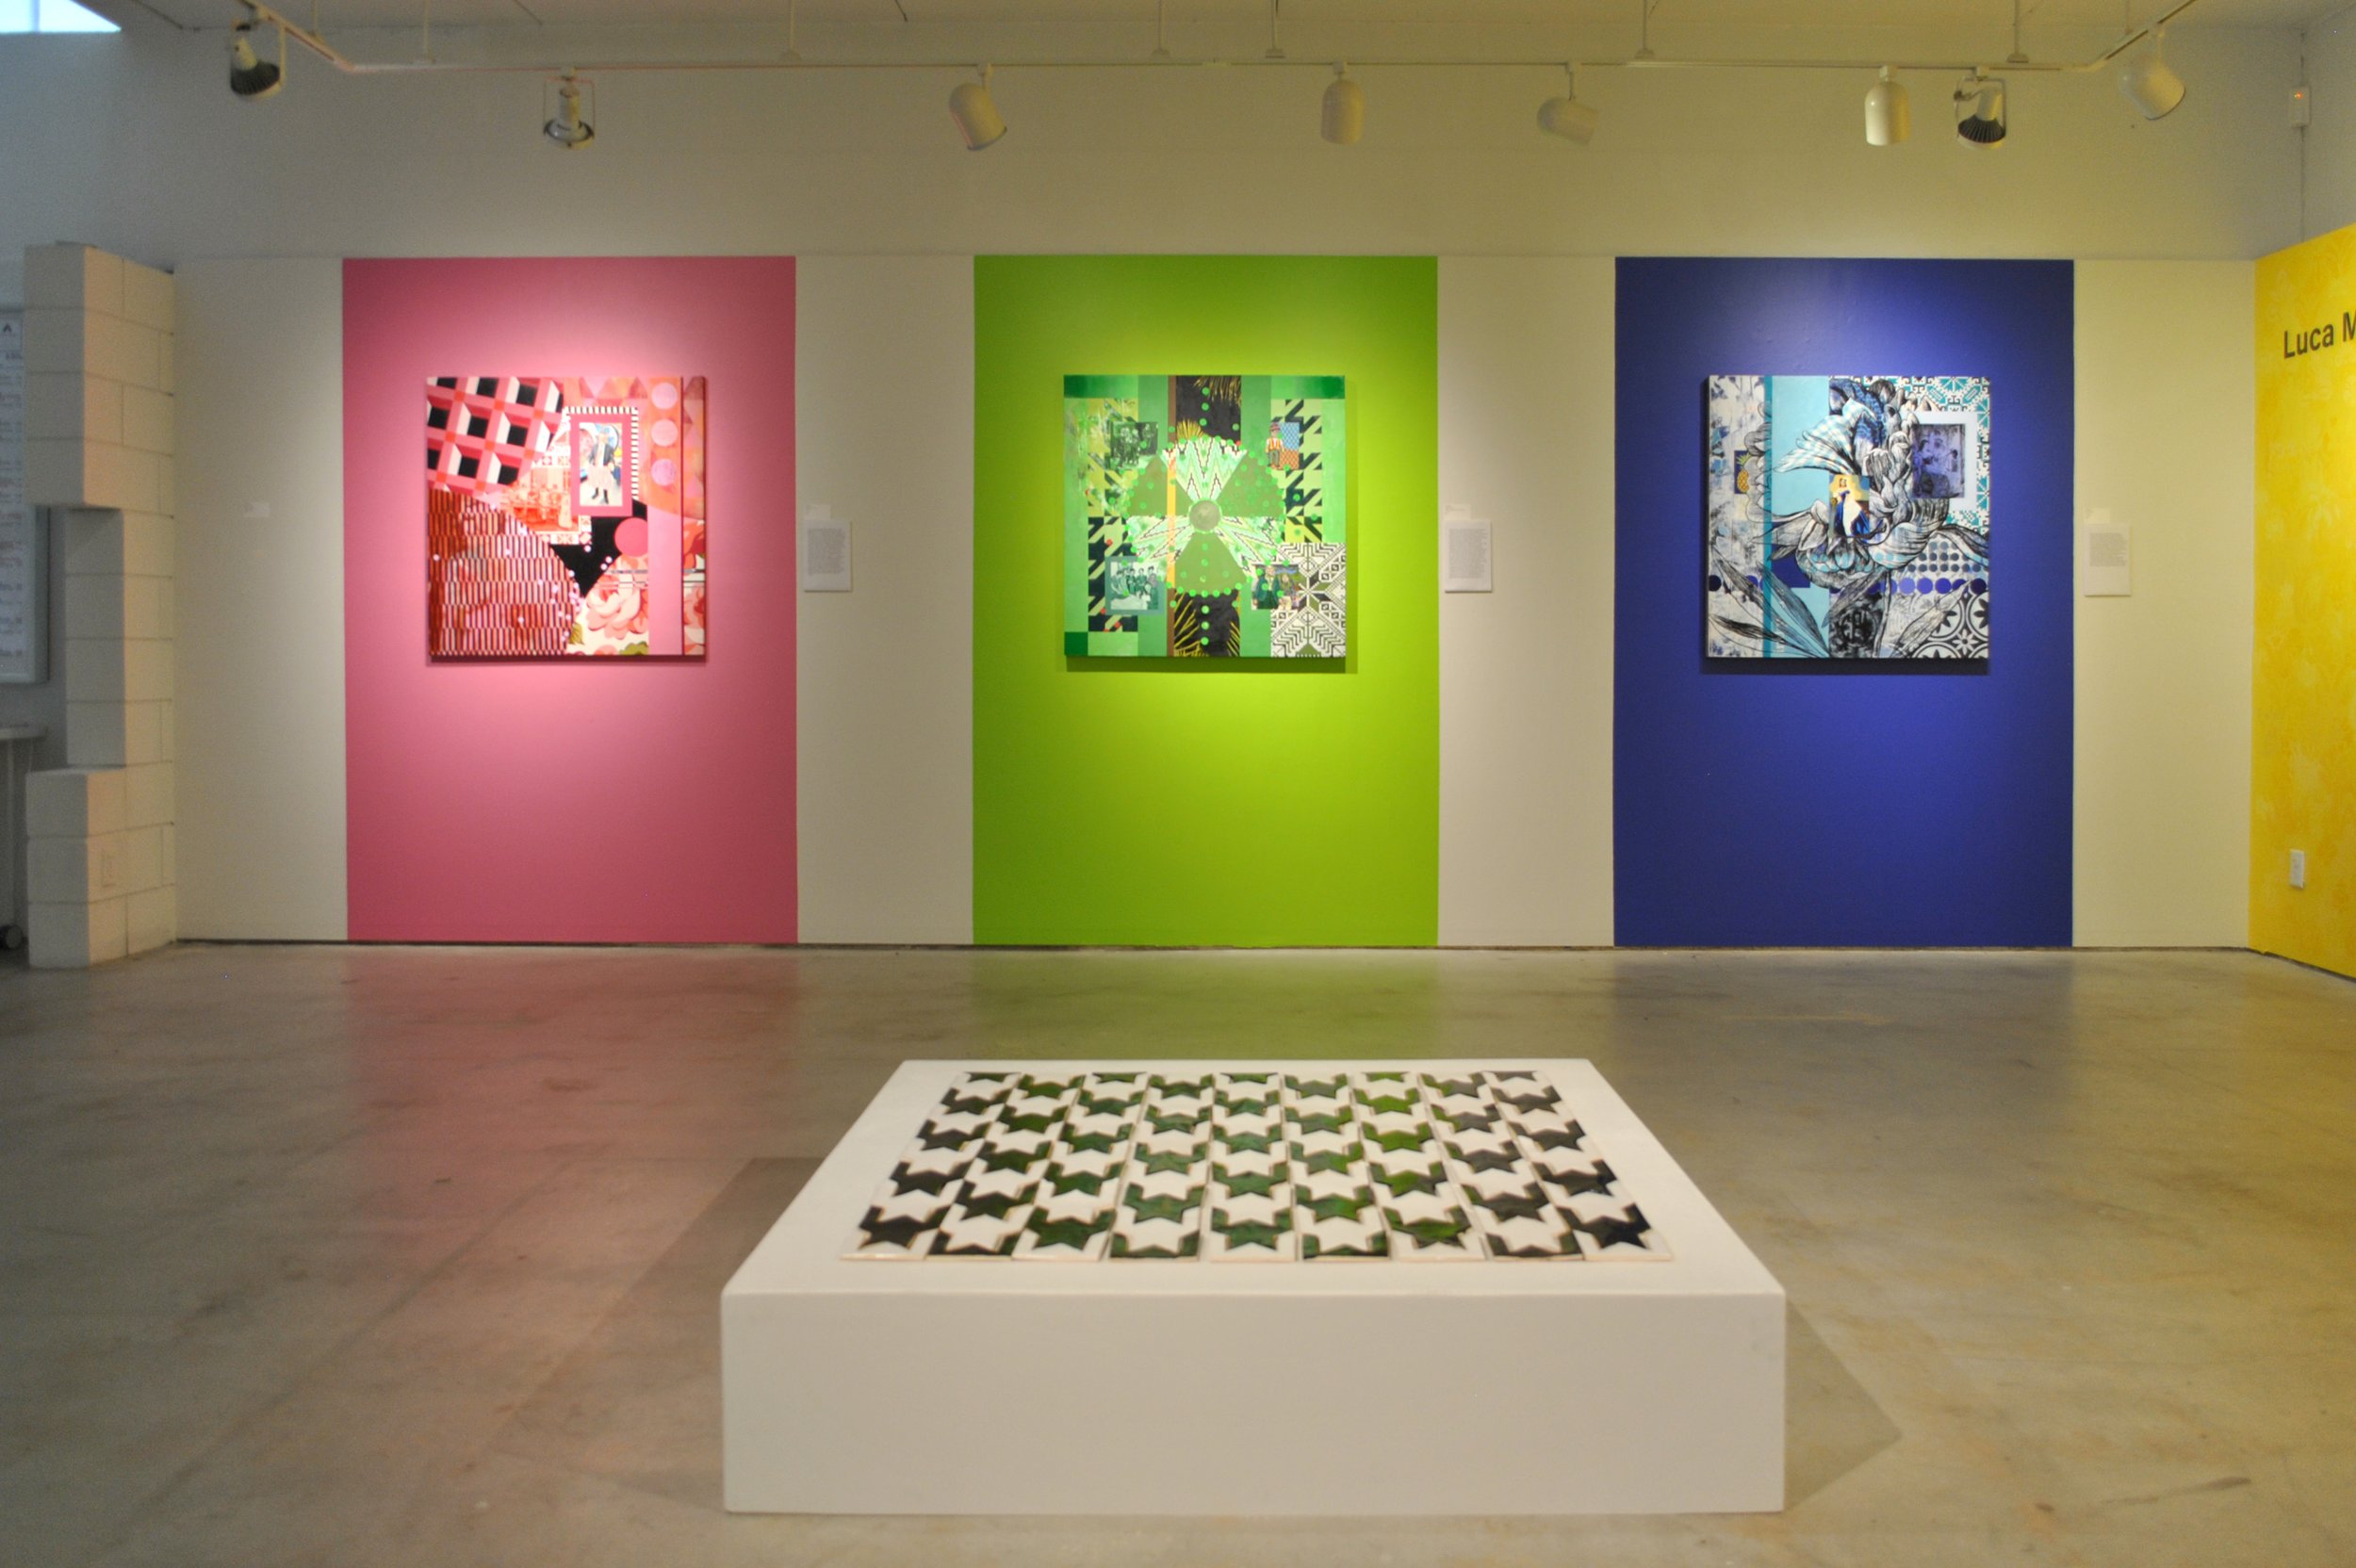  Same Source  February 2 - March 11, 2023  Art Center Sarasota, FL    The art of pattern recognition   